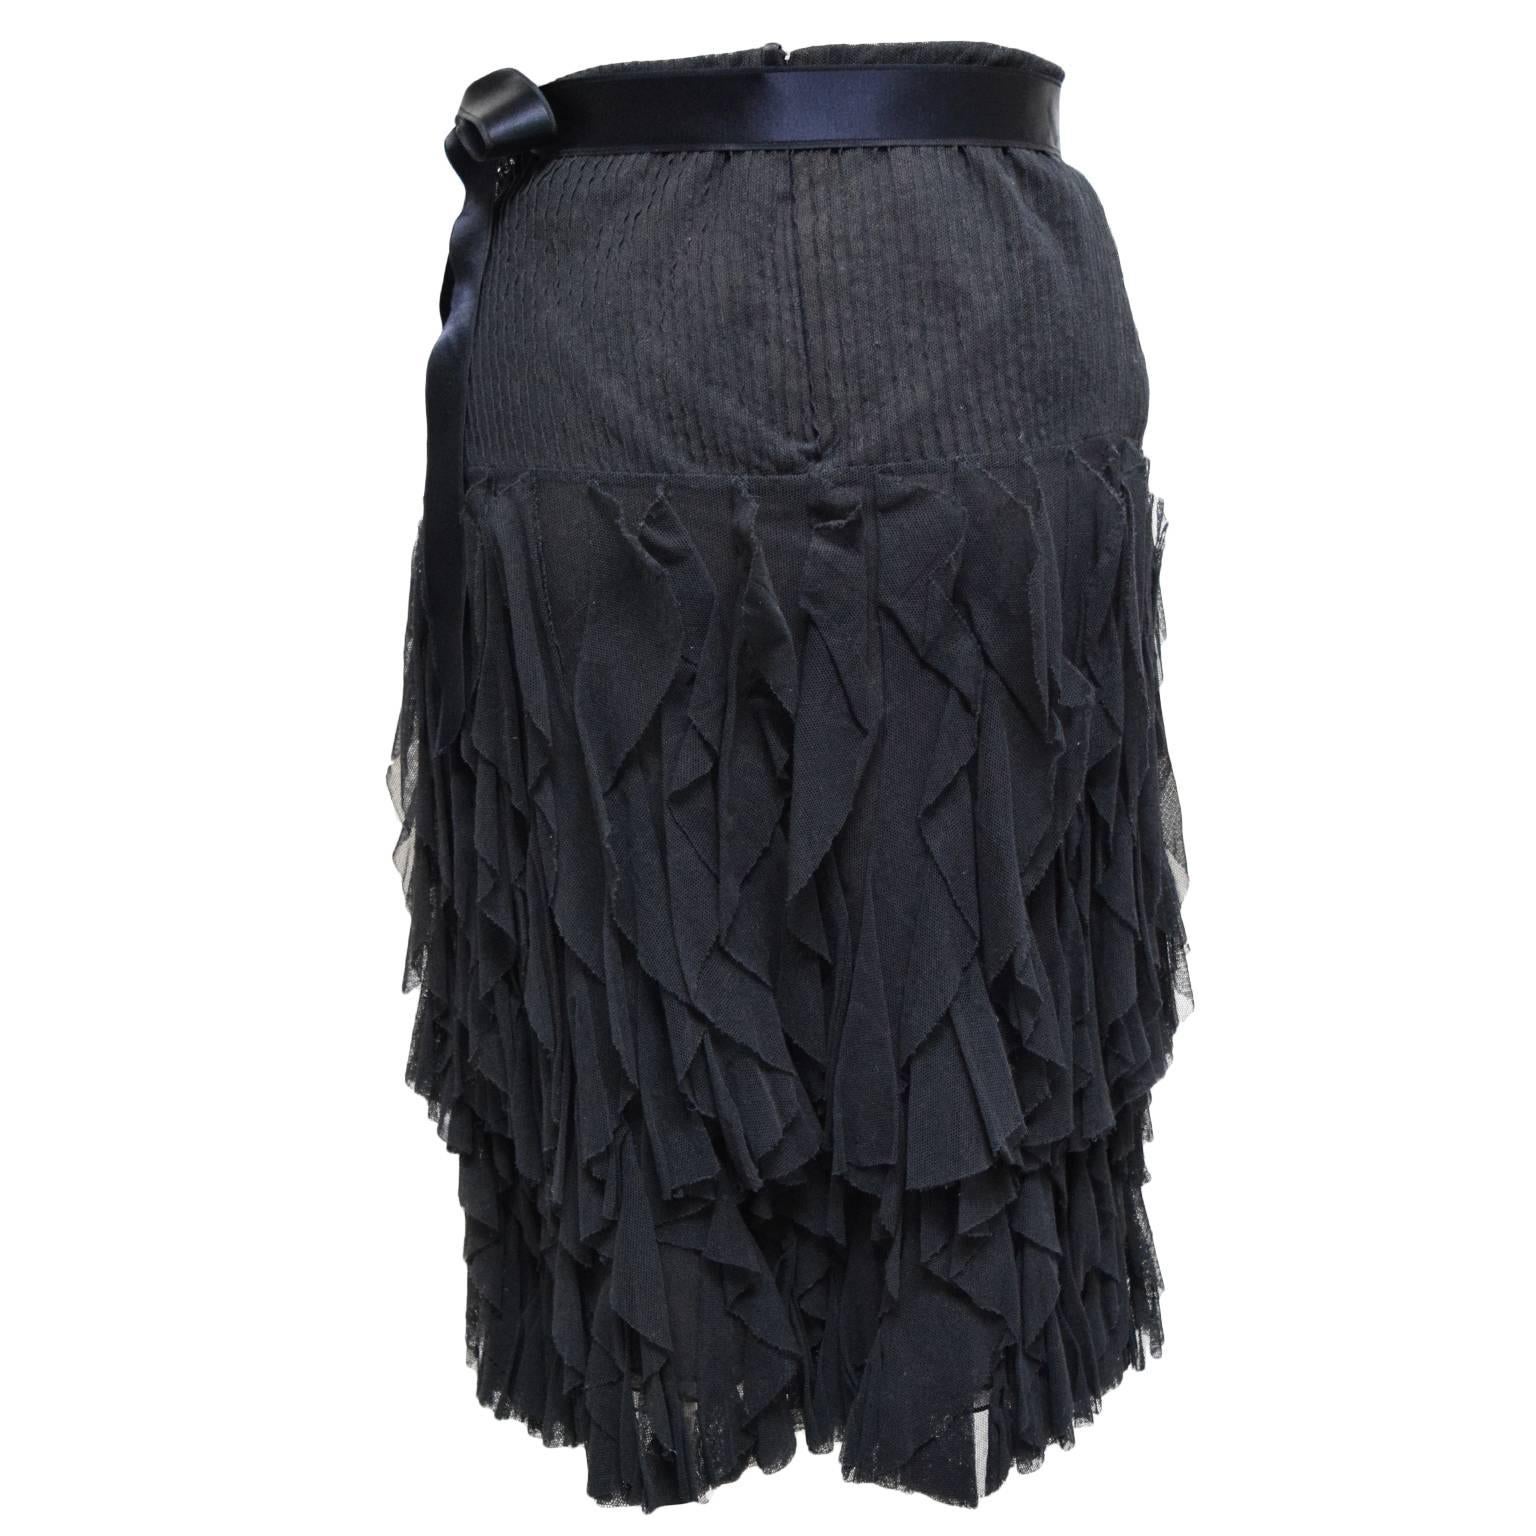 This Oscar de la renta skirt is made from rich black cotton and is striped in layers to create a rippled effect.